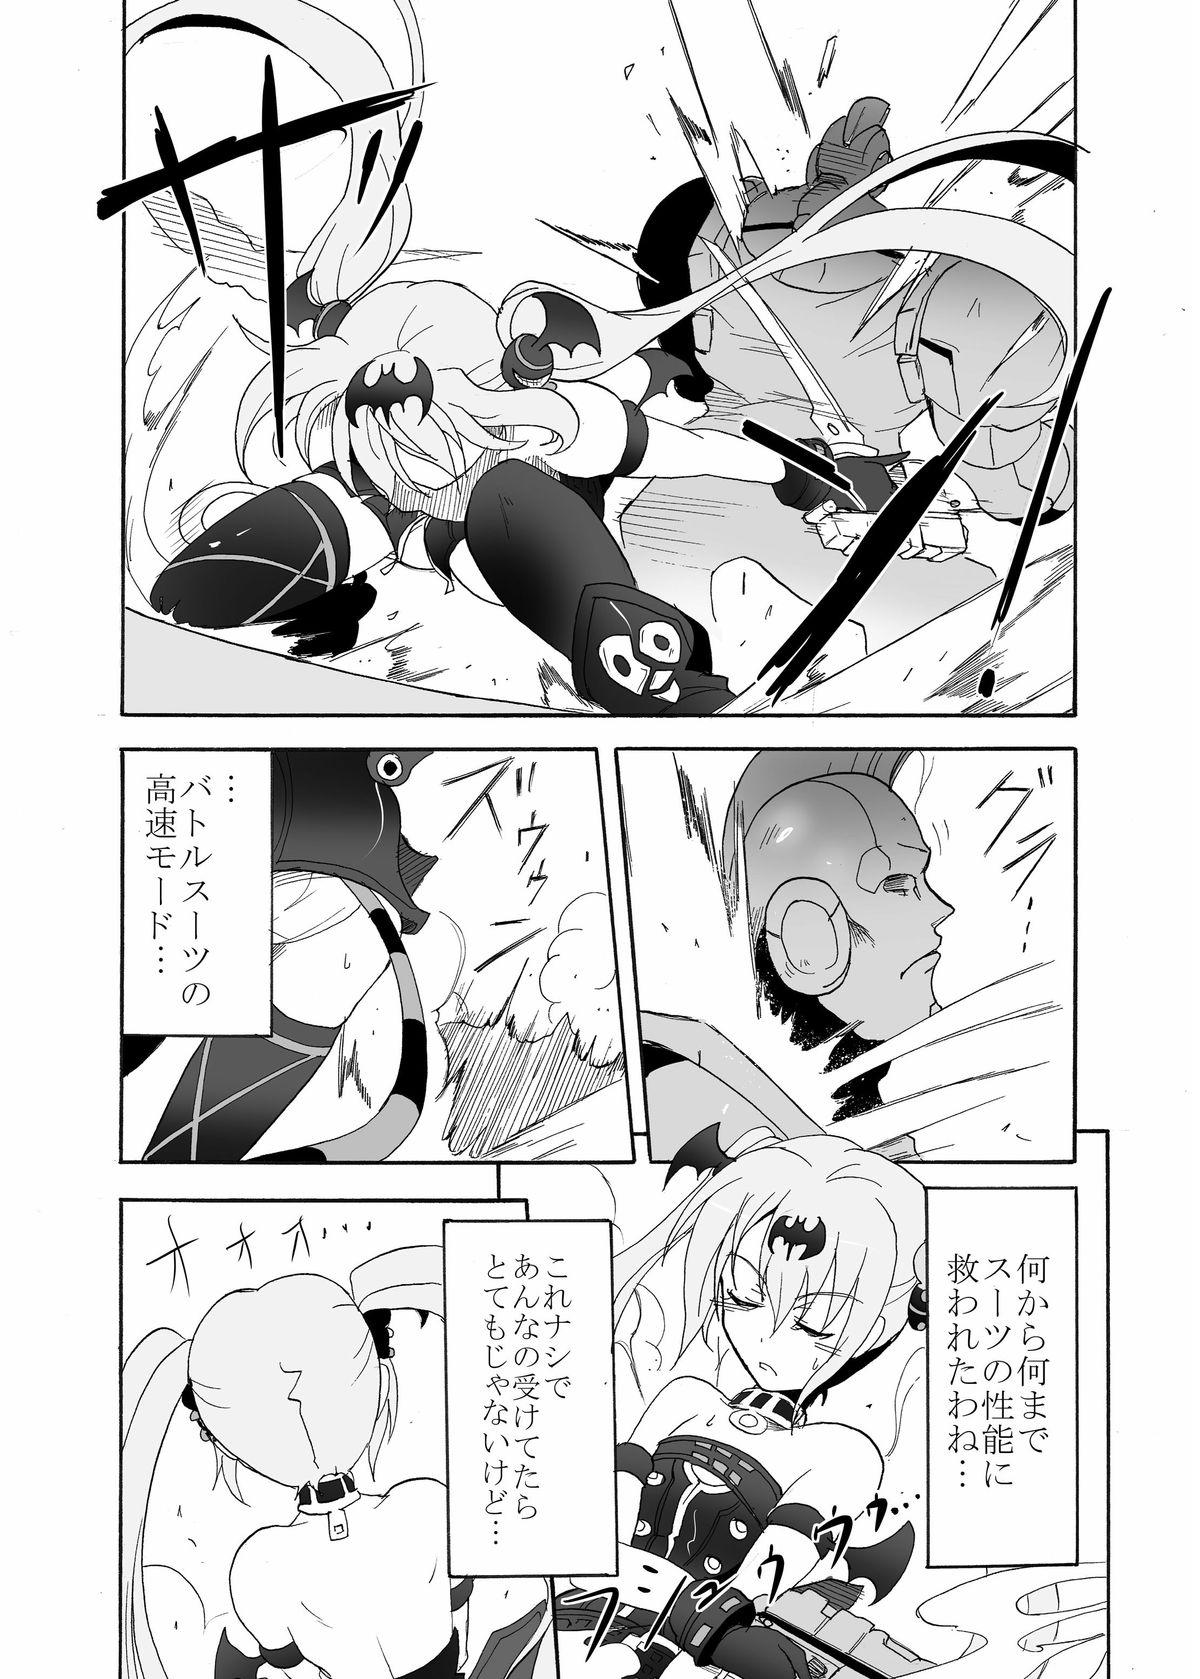 Chile SPIRAL BLOW! - Queens blade Ginger - Page 10